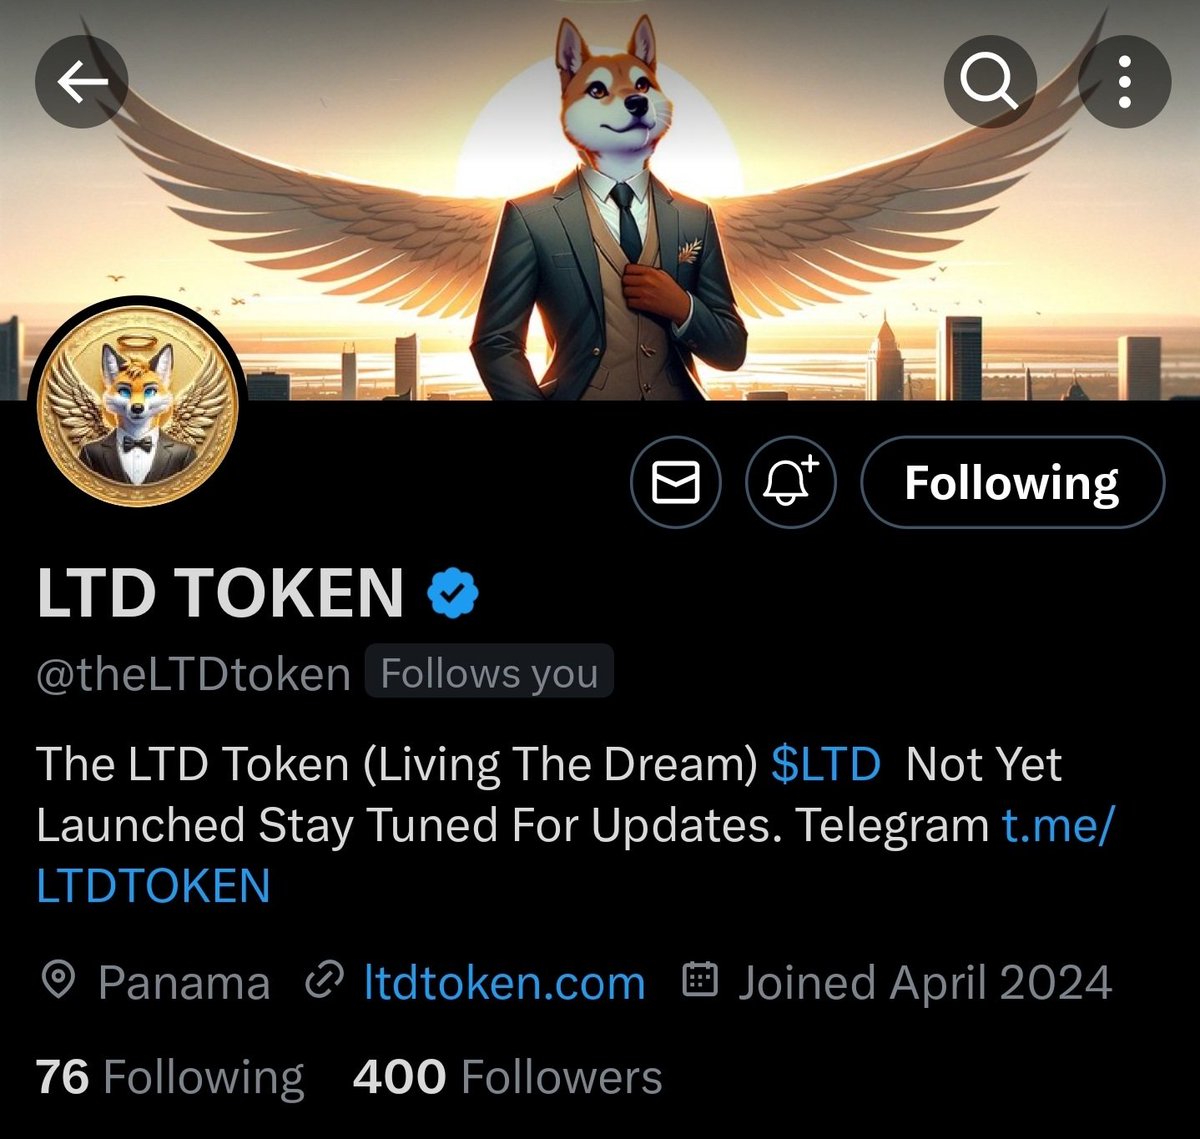 Woof woof
$LTD Is #LivingTheDream
@theLTDtoken has reached a goal of
🔥400 followers 🔥👇
                       👉 can we hit 500👈
#shibaArmy 
Presale.....sooon.....
-follow for all the updates-